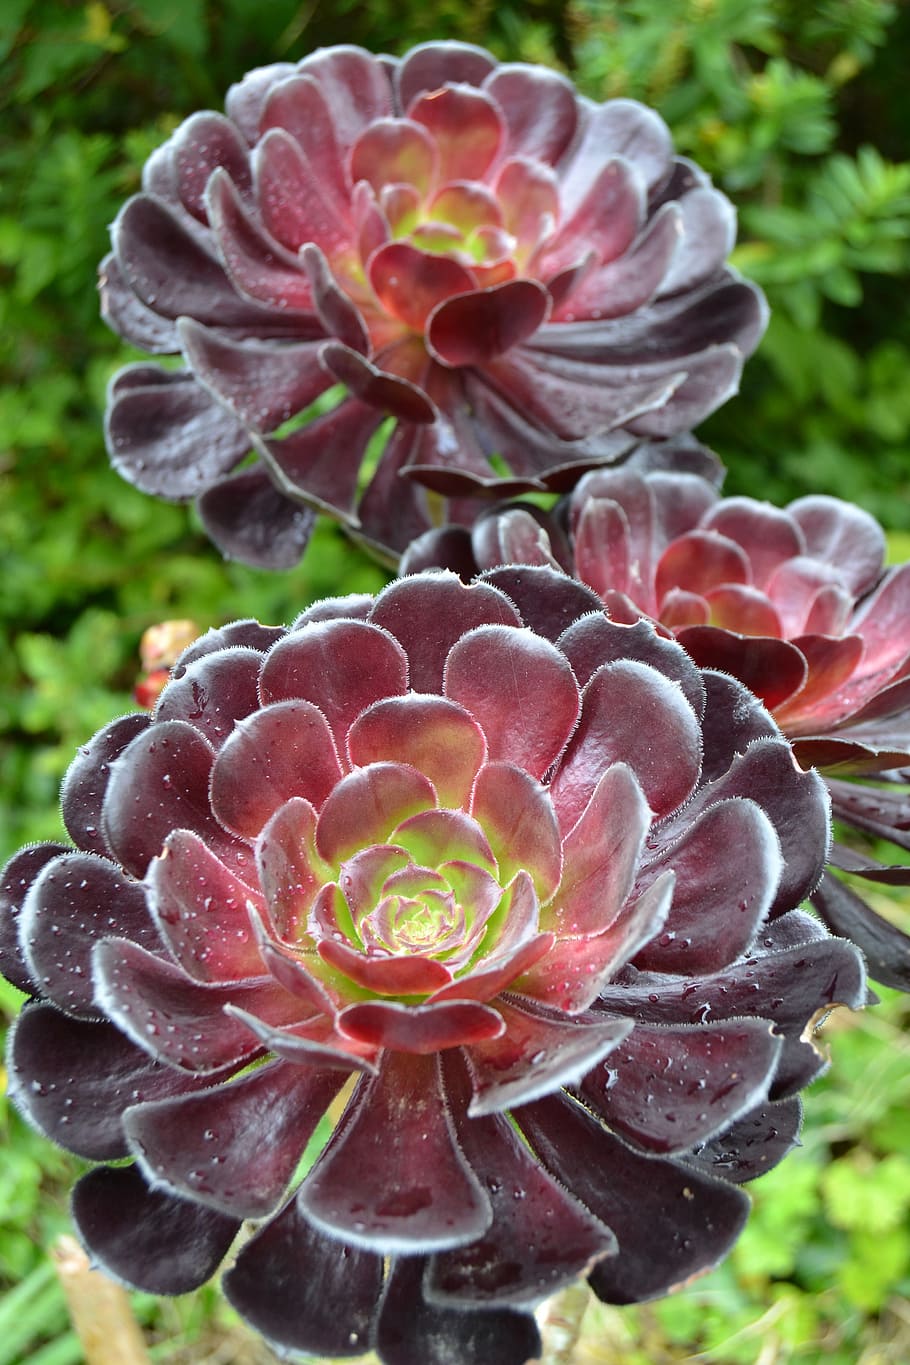 saucer plant, aeonium arboreum, flower, garden, england, cornwall, plant, growth, beauty in nature, close-up